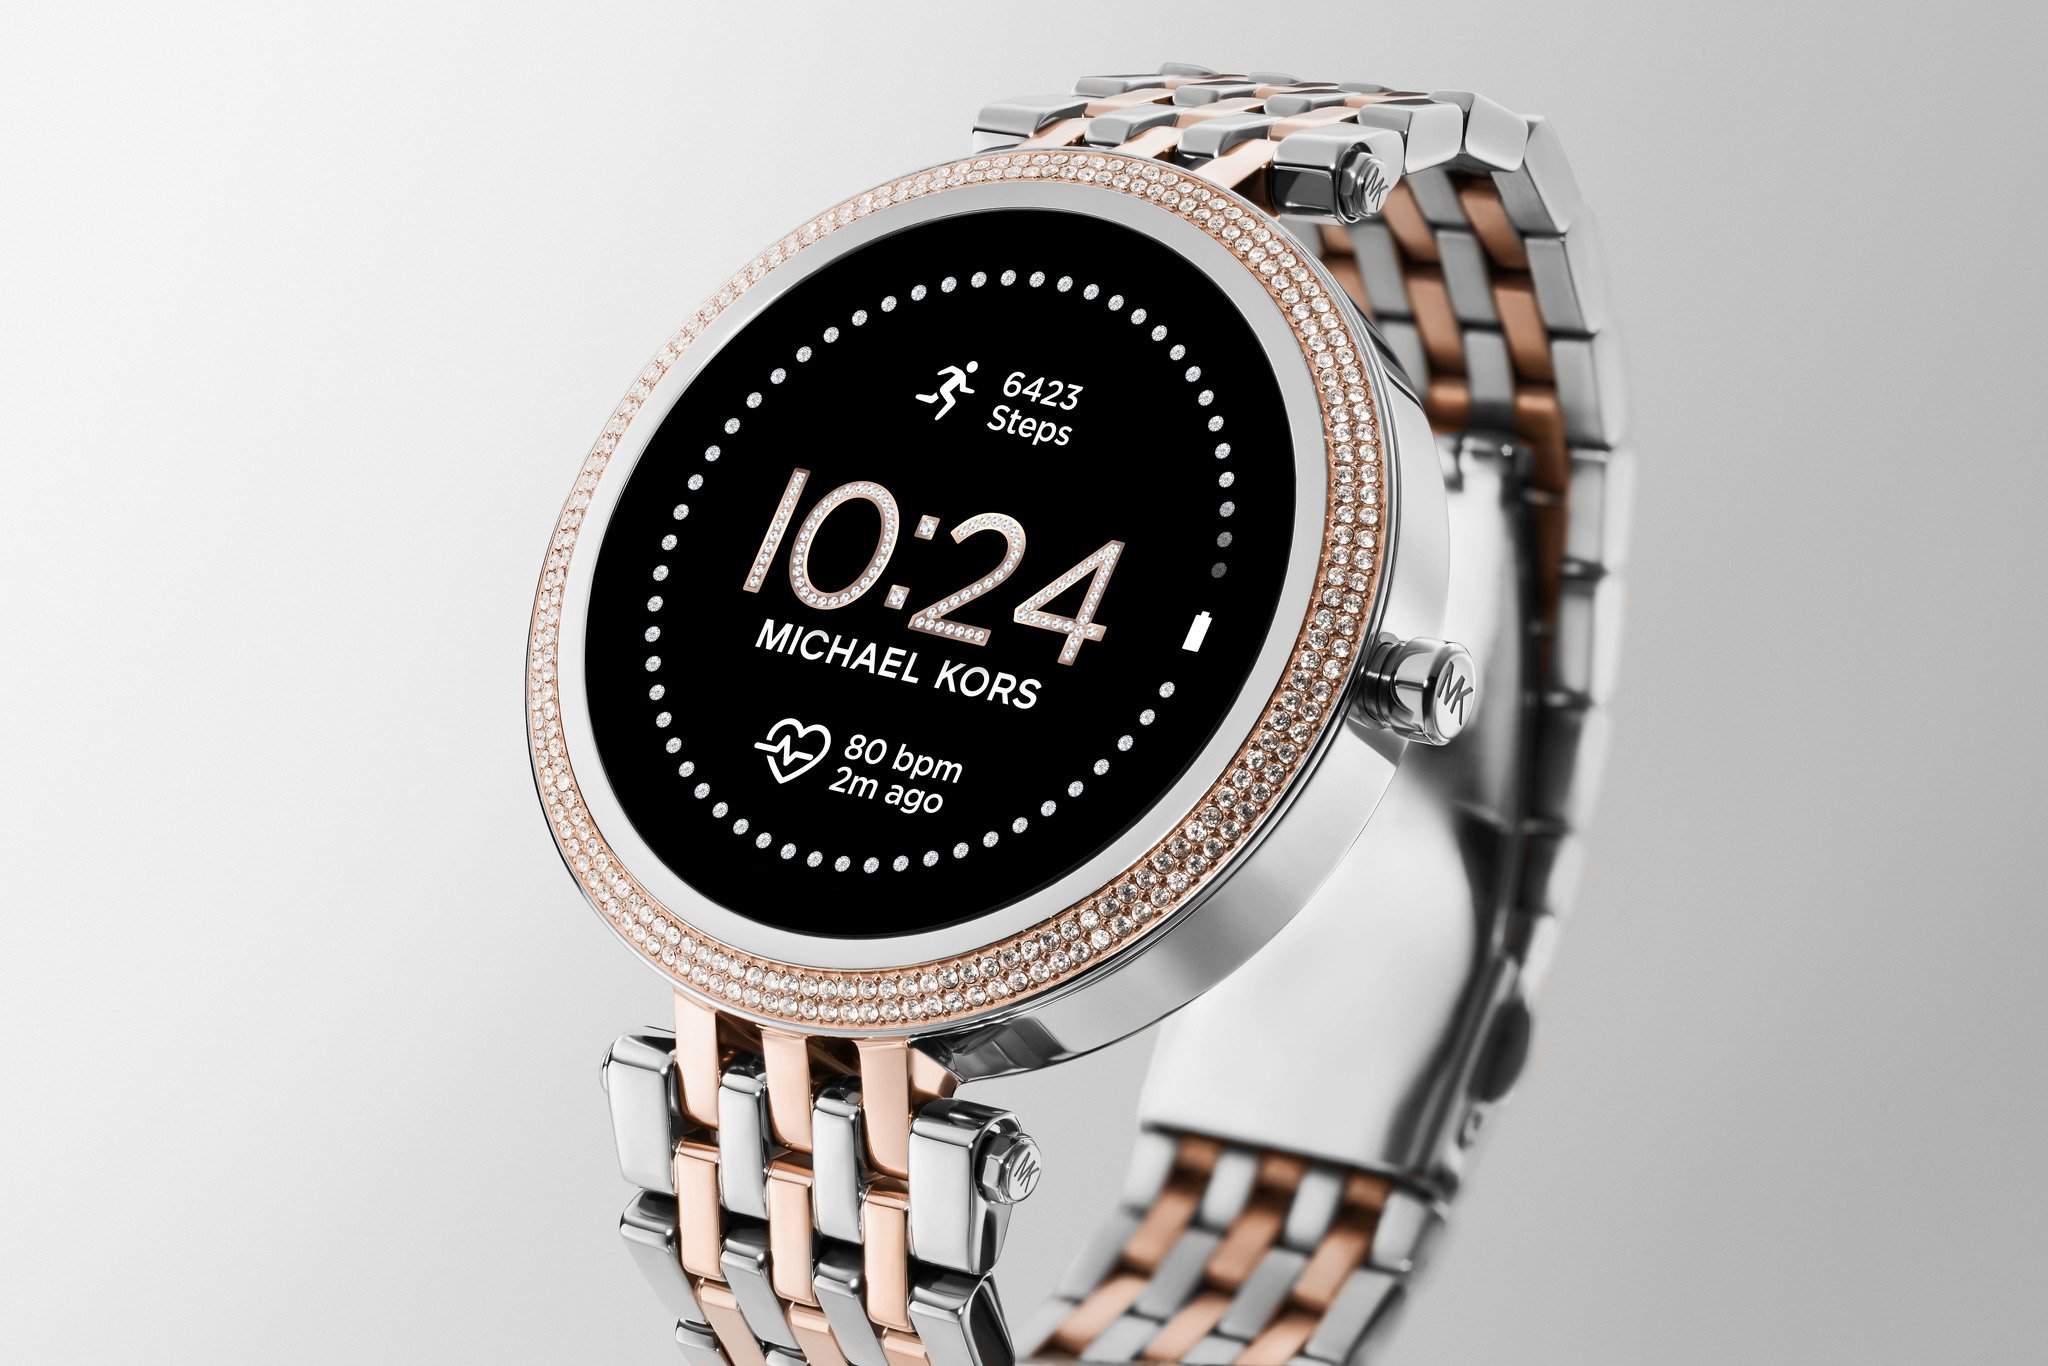 Fossil and Michael Kors give the Gen 5E 